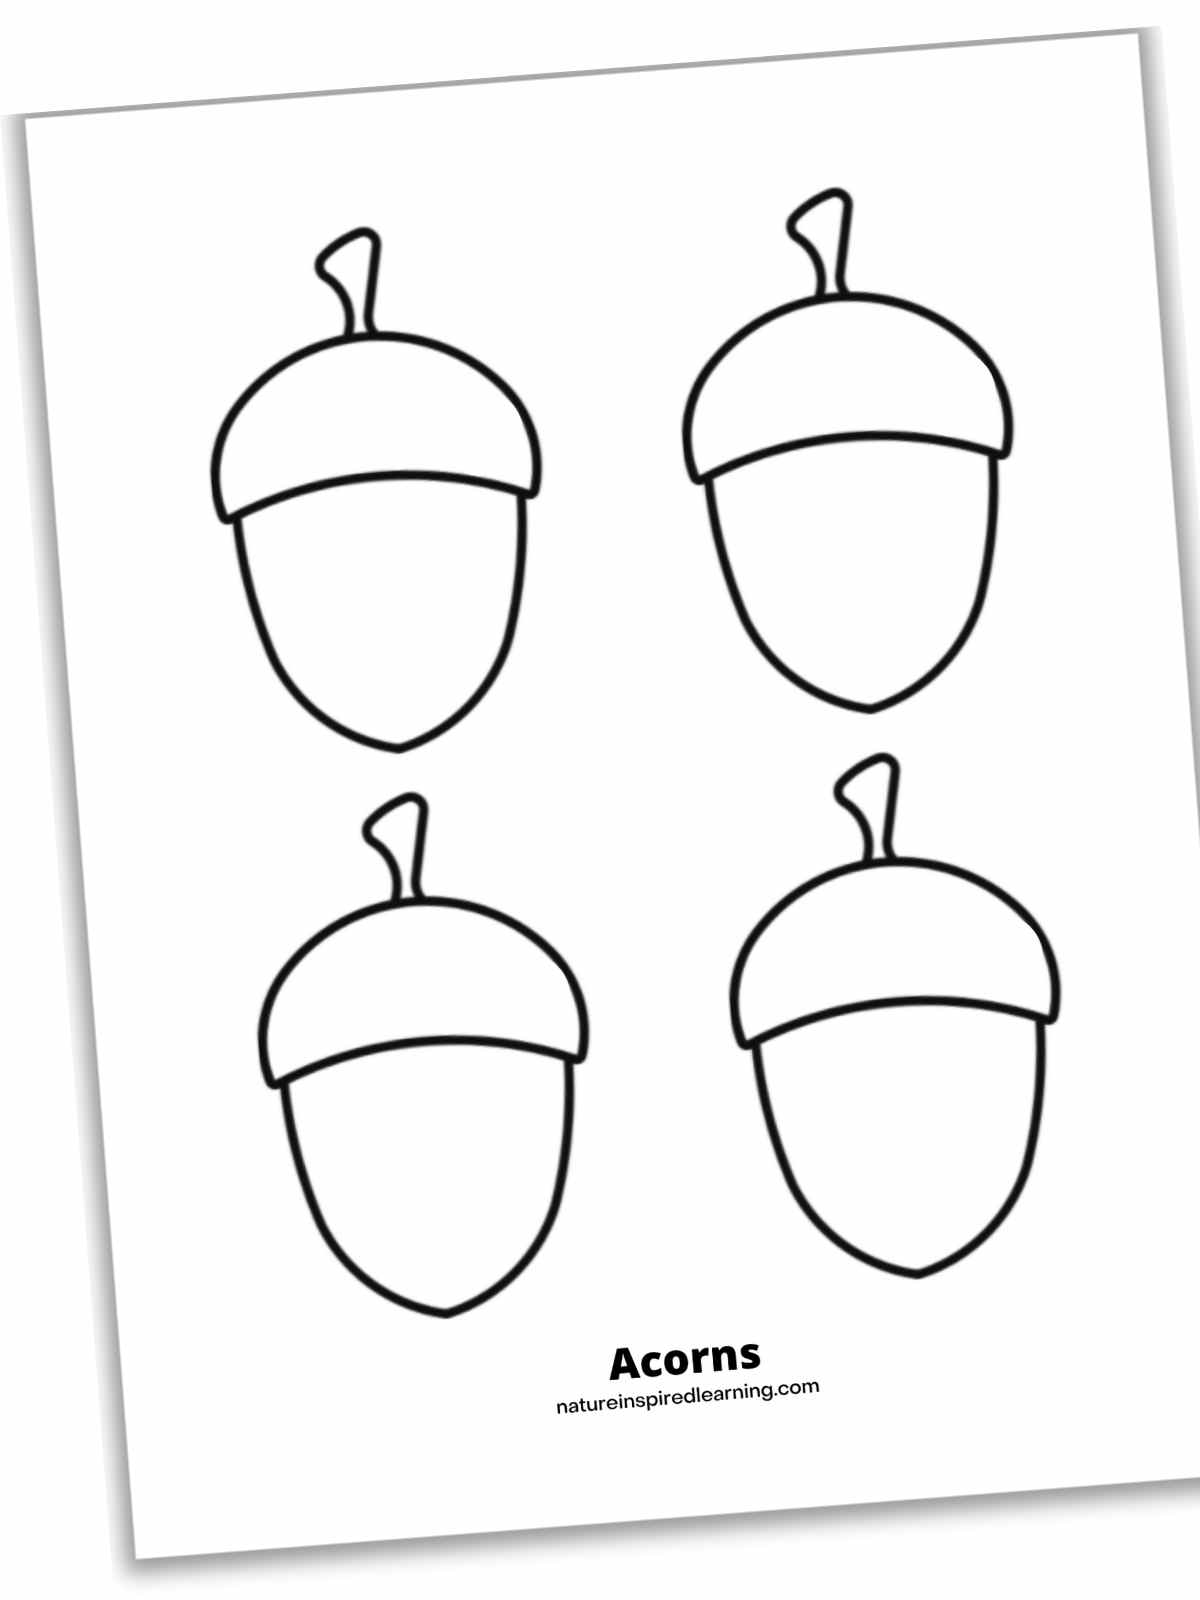 four black and white outlines of acorns